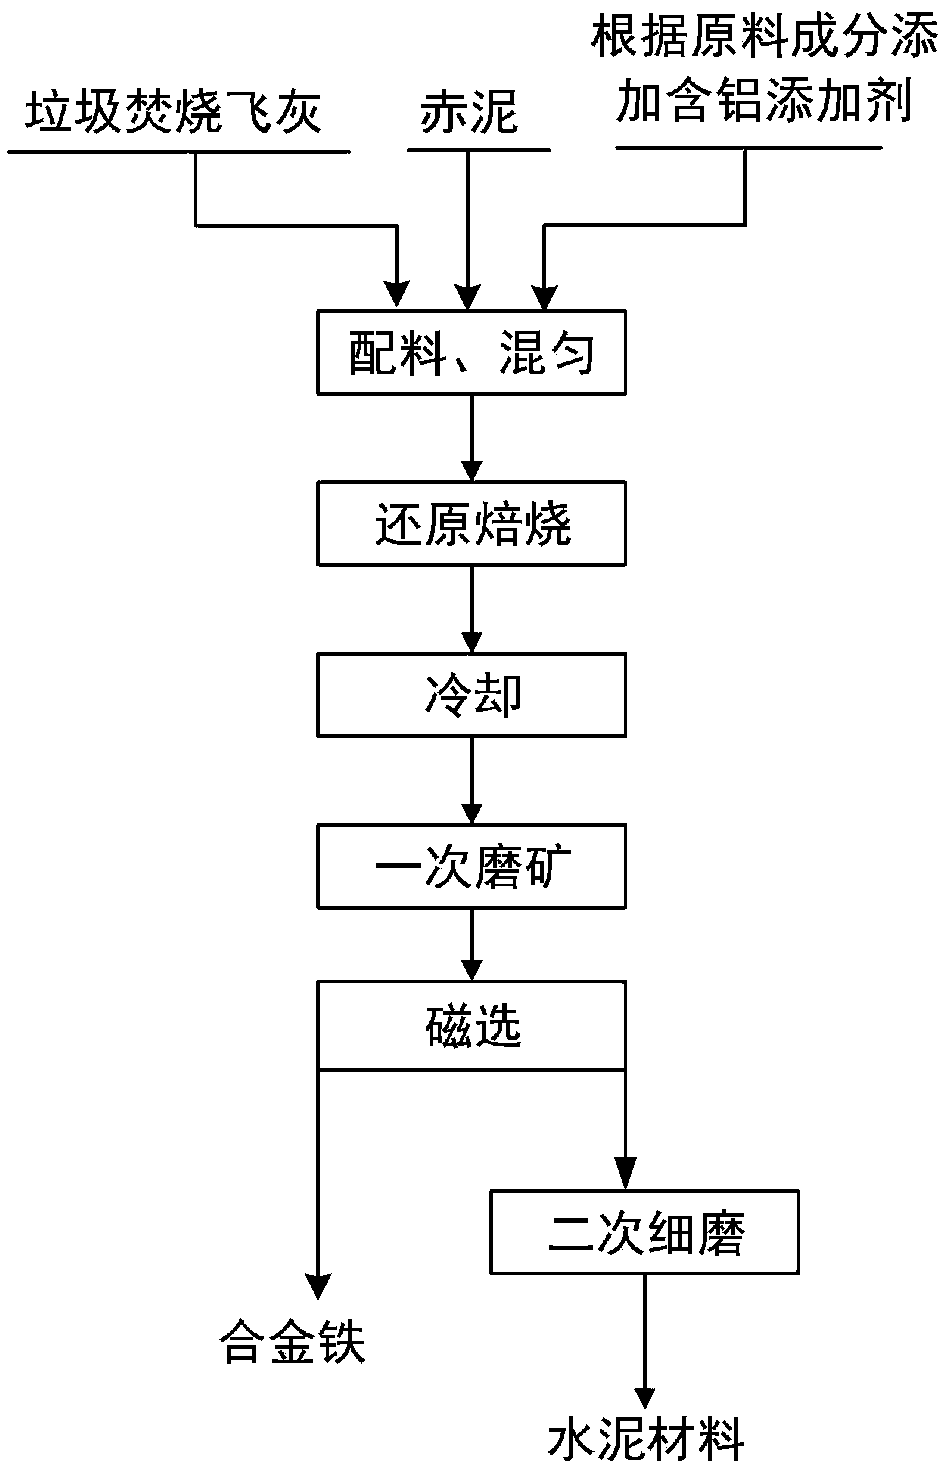 Method for preparing alloy iron and cement material